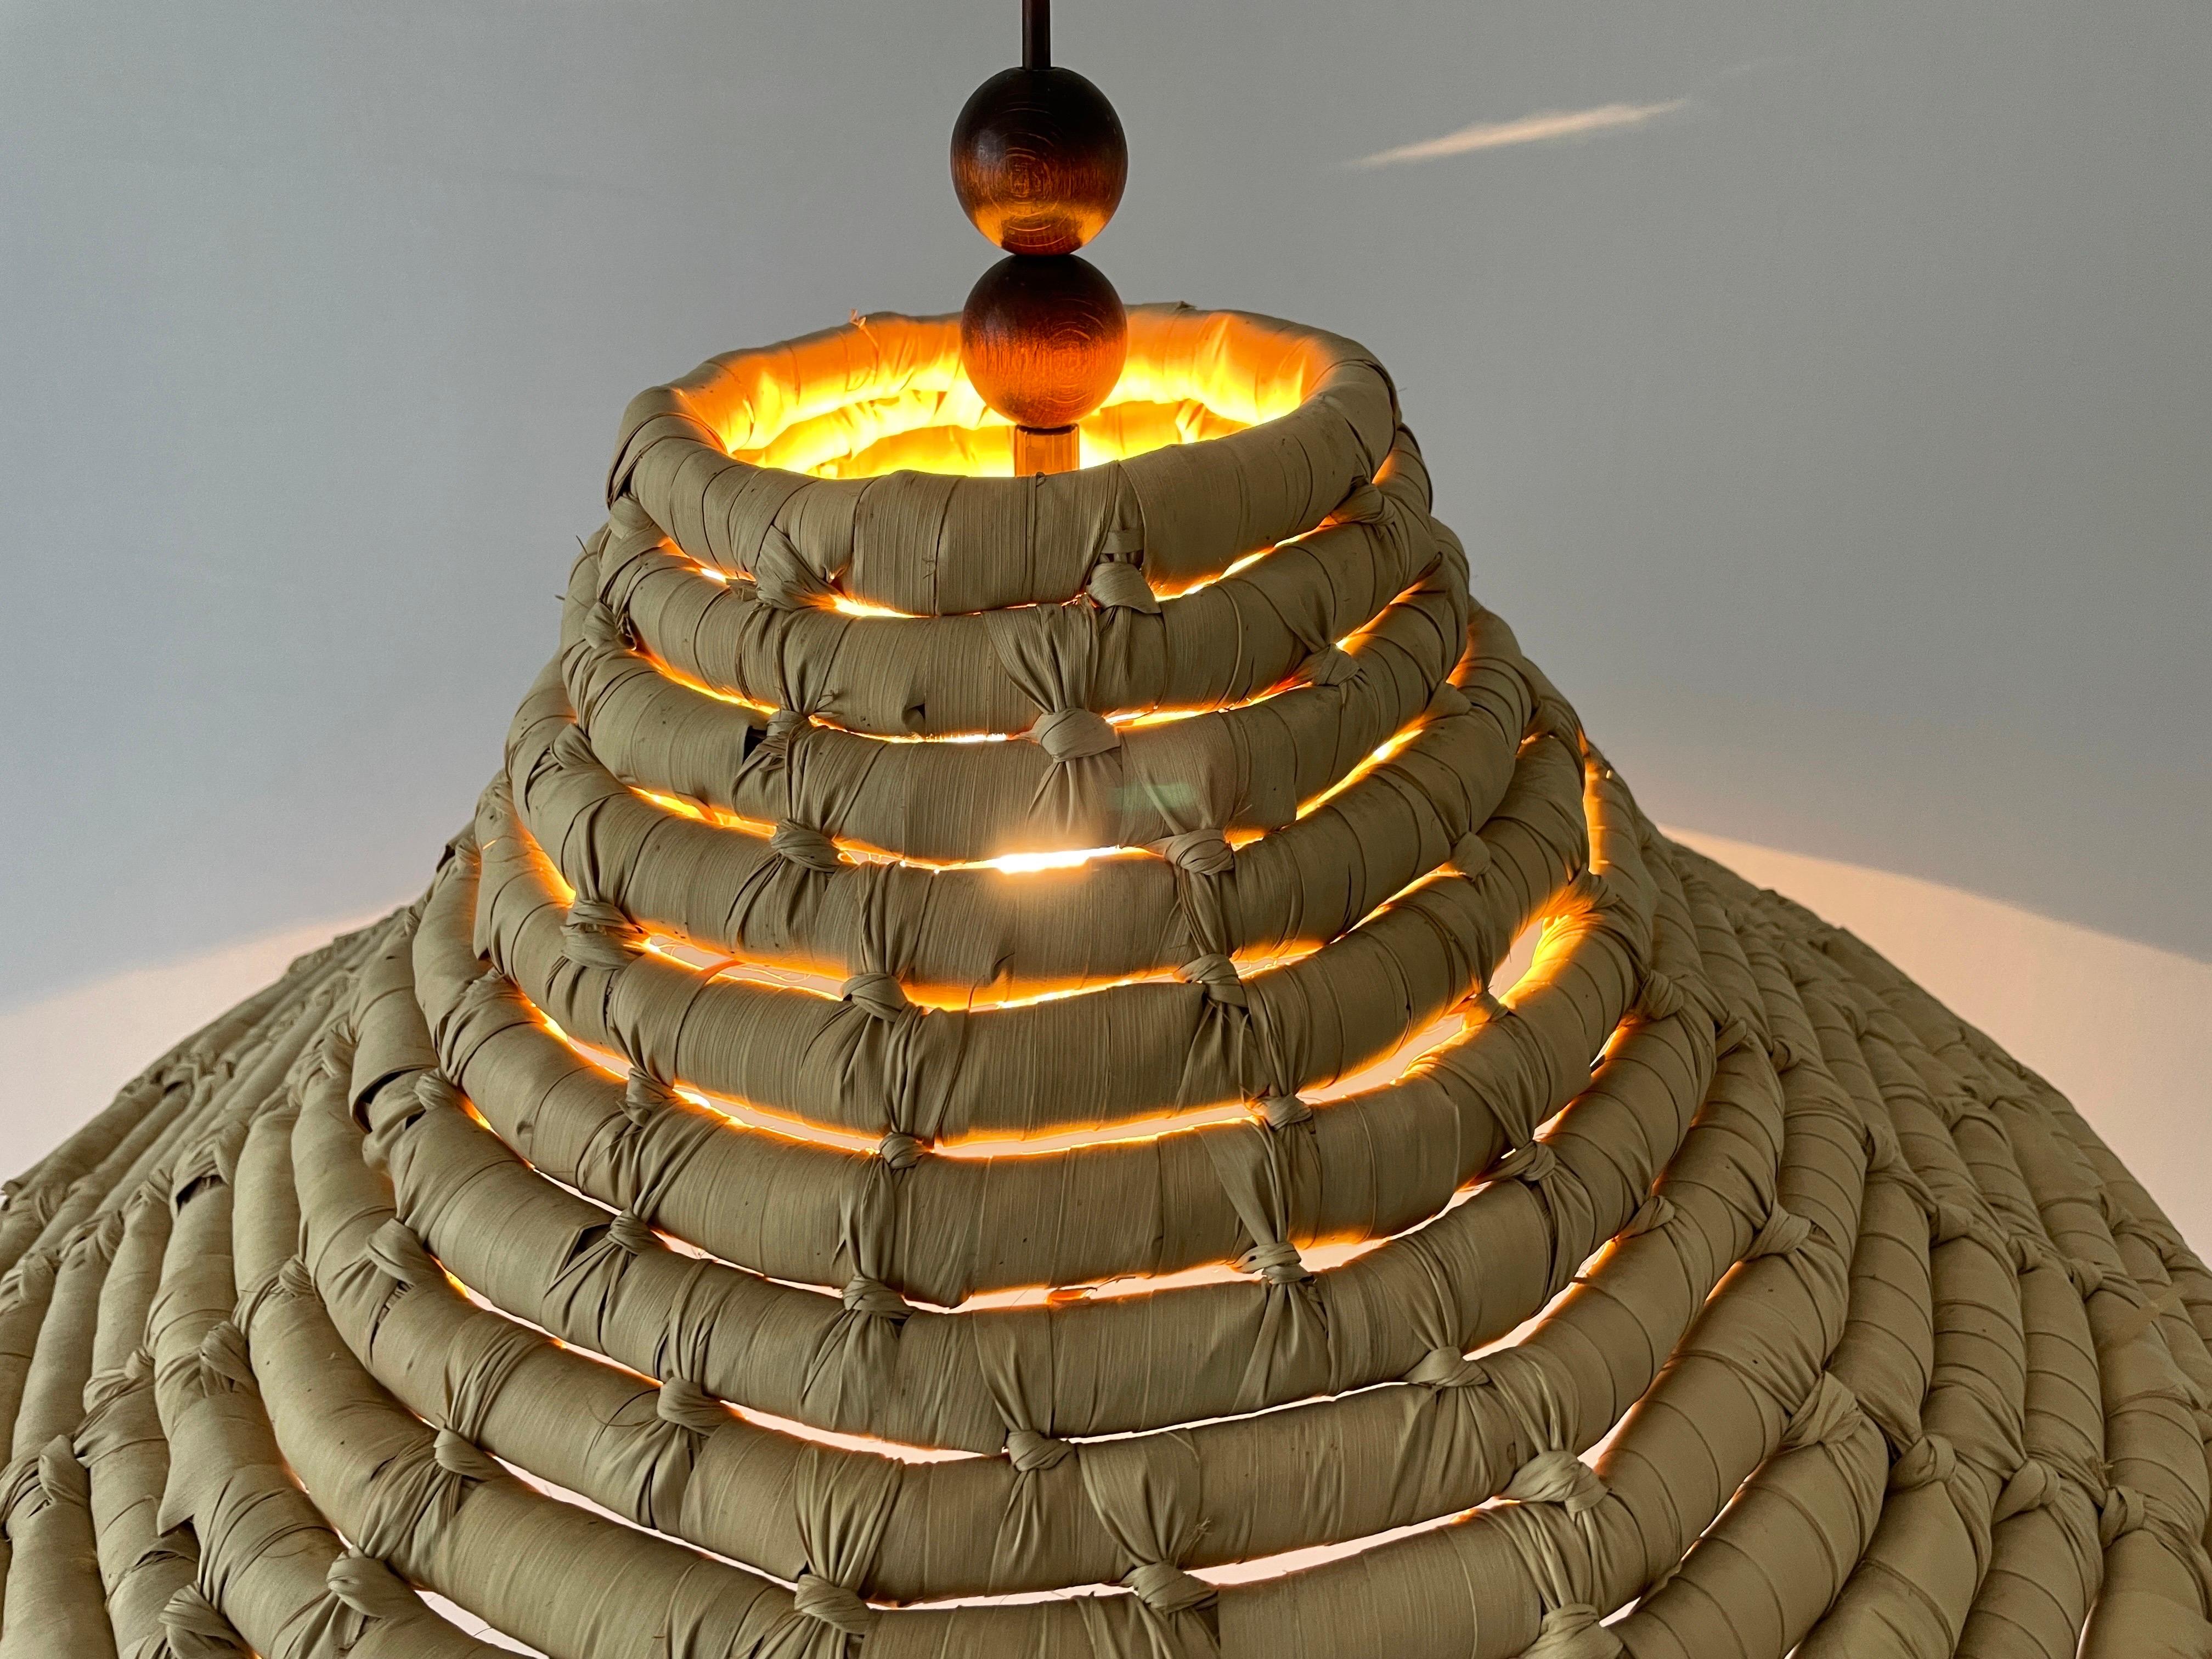 Unusual Large Made of Natural Plant Material Pendant Lamp, 1960s, Germany For Sale 7